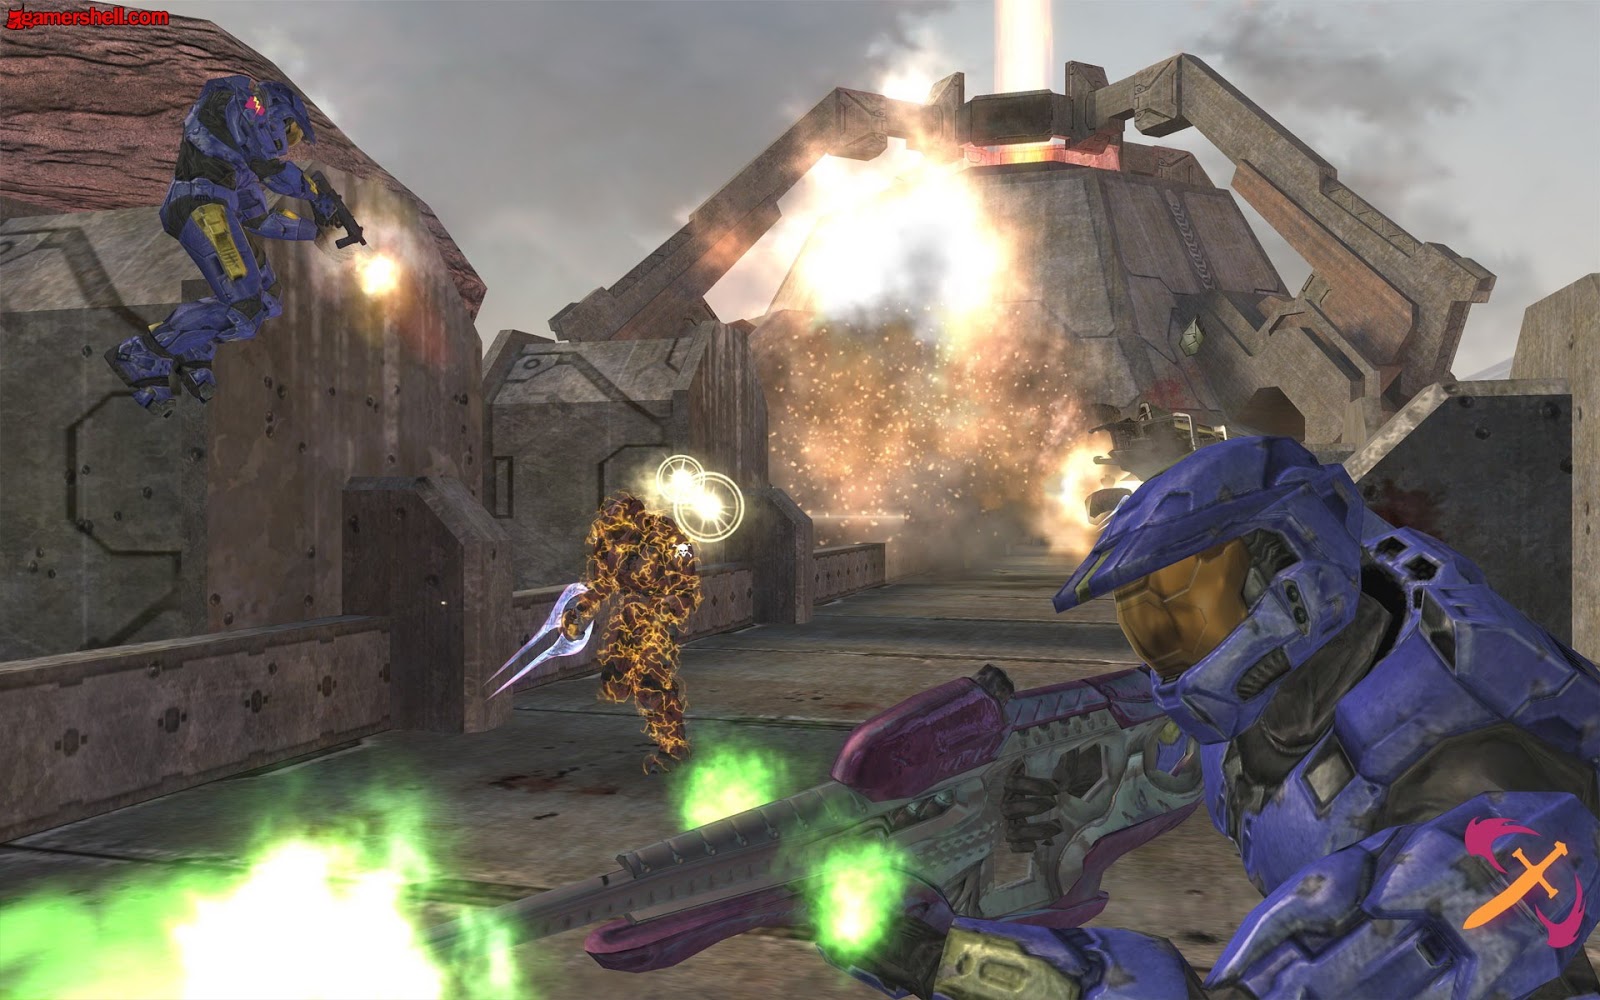 halo 2 pc game zip file download